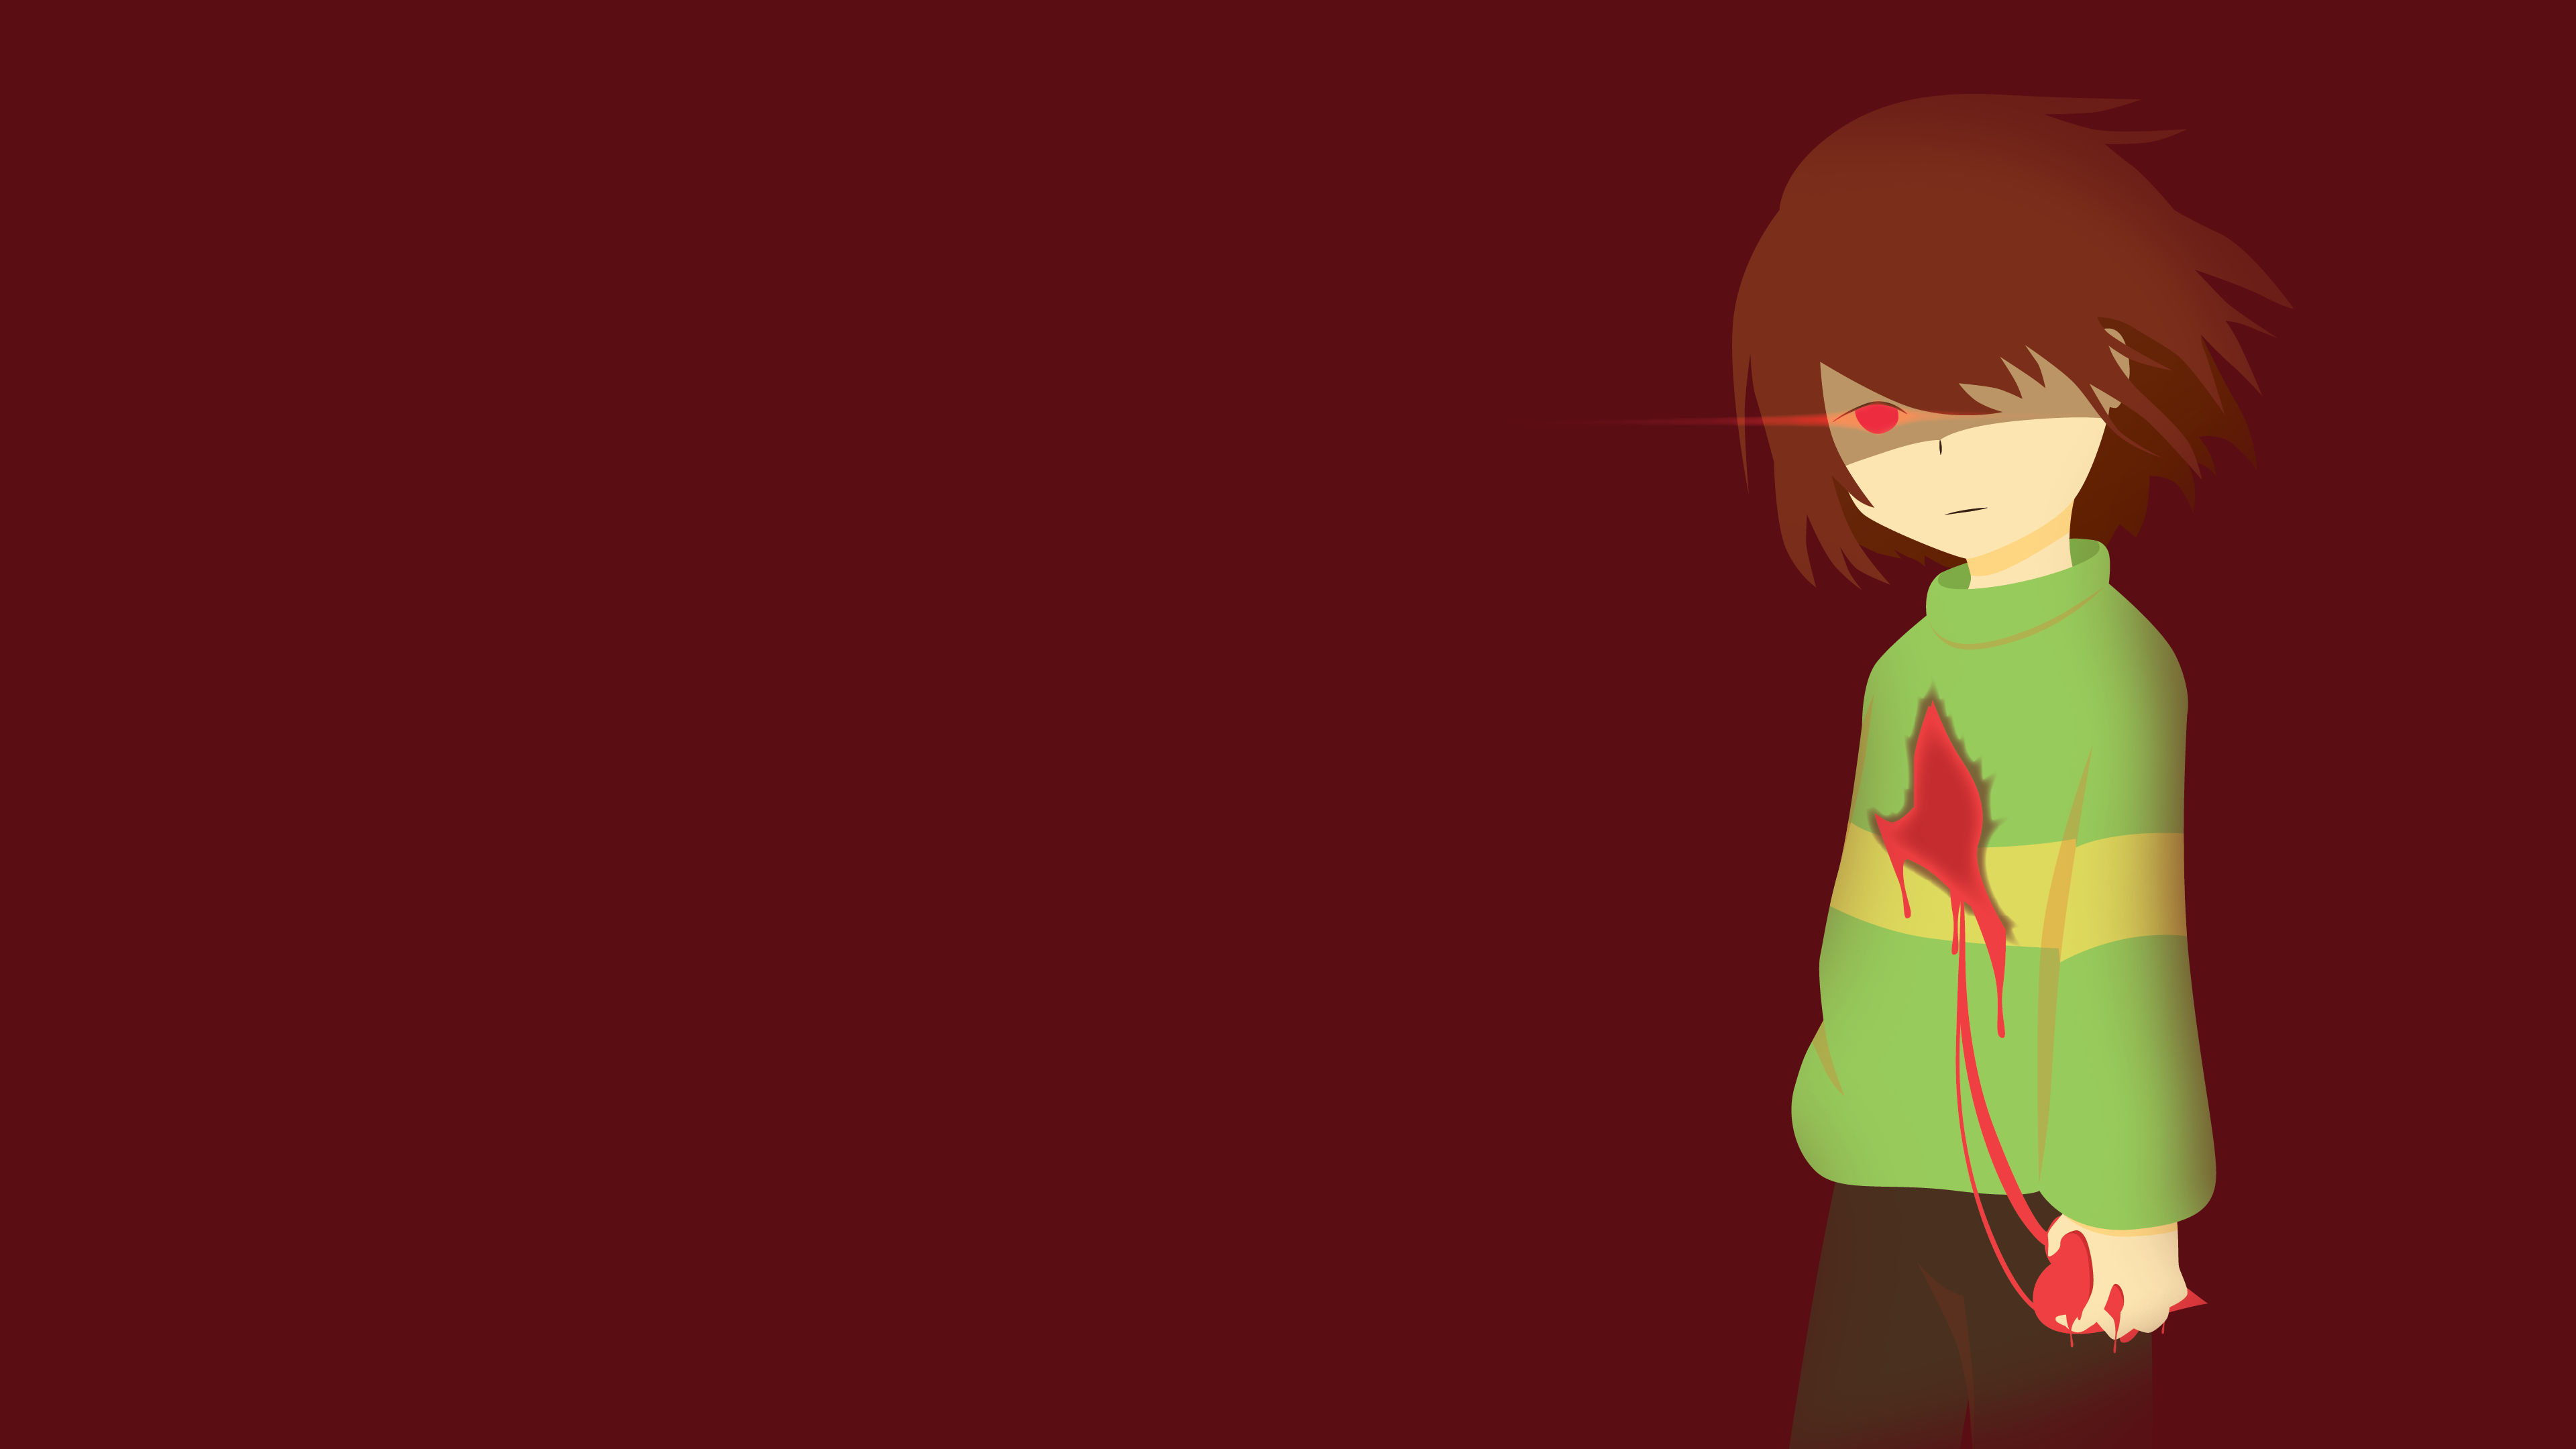 Kris (deltarune) HD Wallpapers and Backgrounds. 